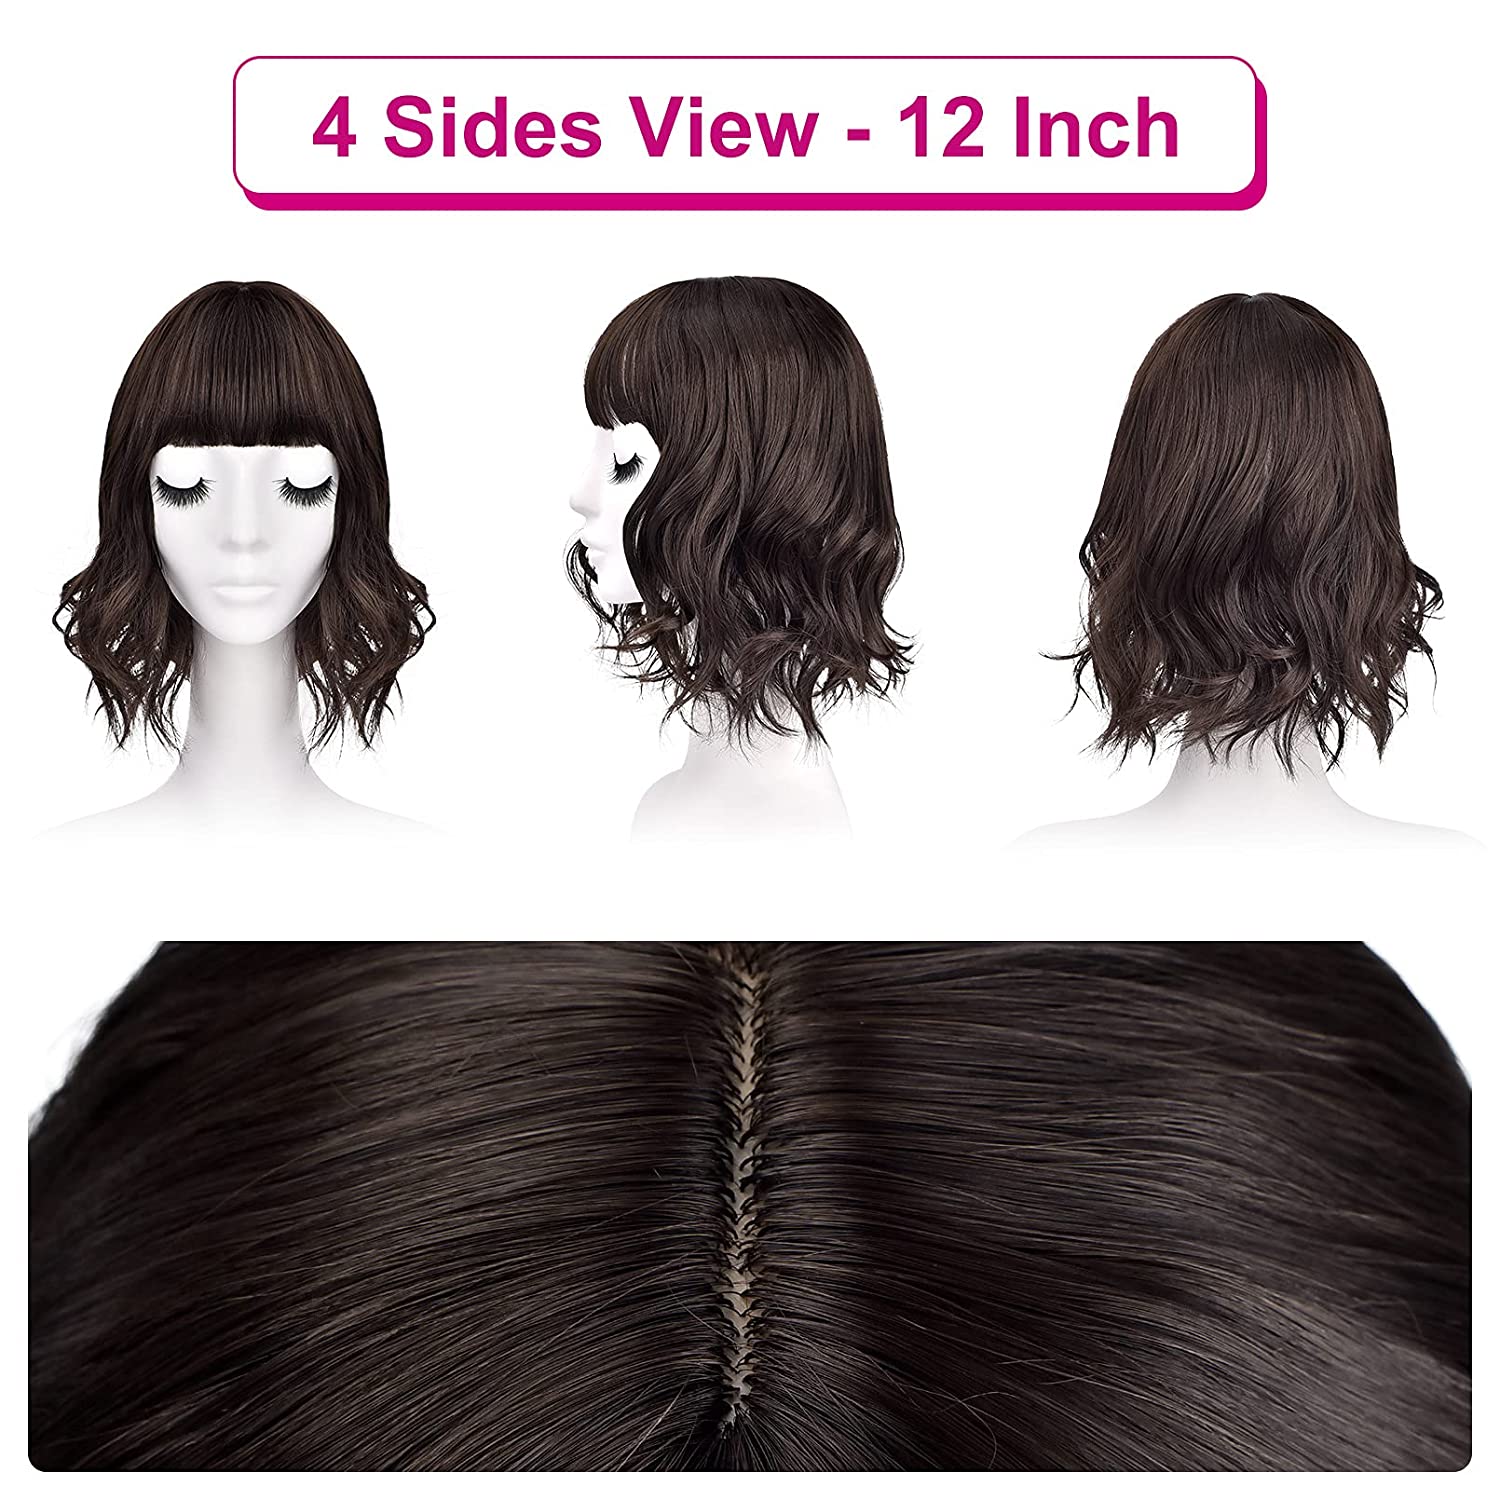 REECHO Hair Topper, Wiglets Hairpieces for Women with Thinning Hair 3 Clips in Wavy Hair Extensions Enhancer with bangs